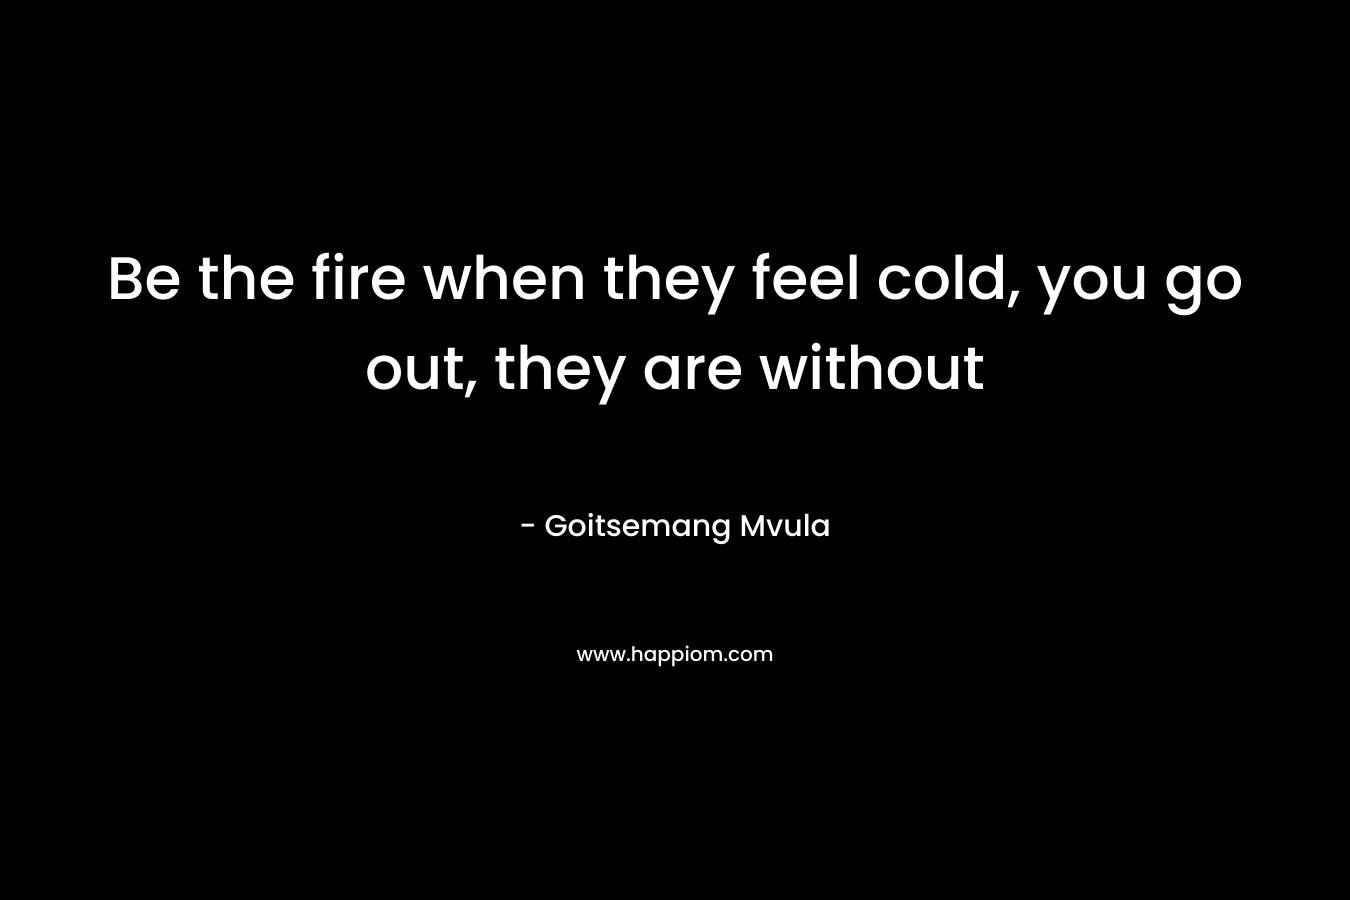 Be the fire when they feel cold, you go out, they are without